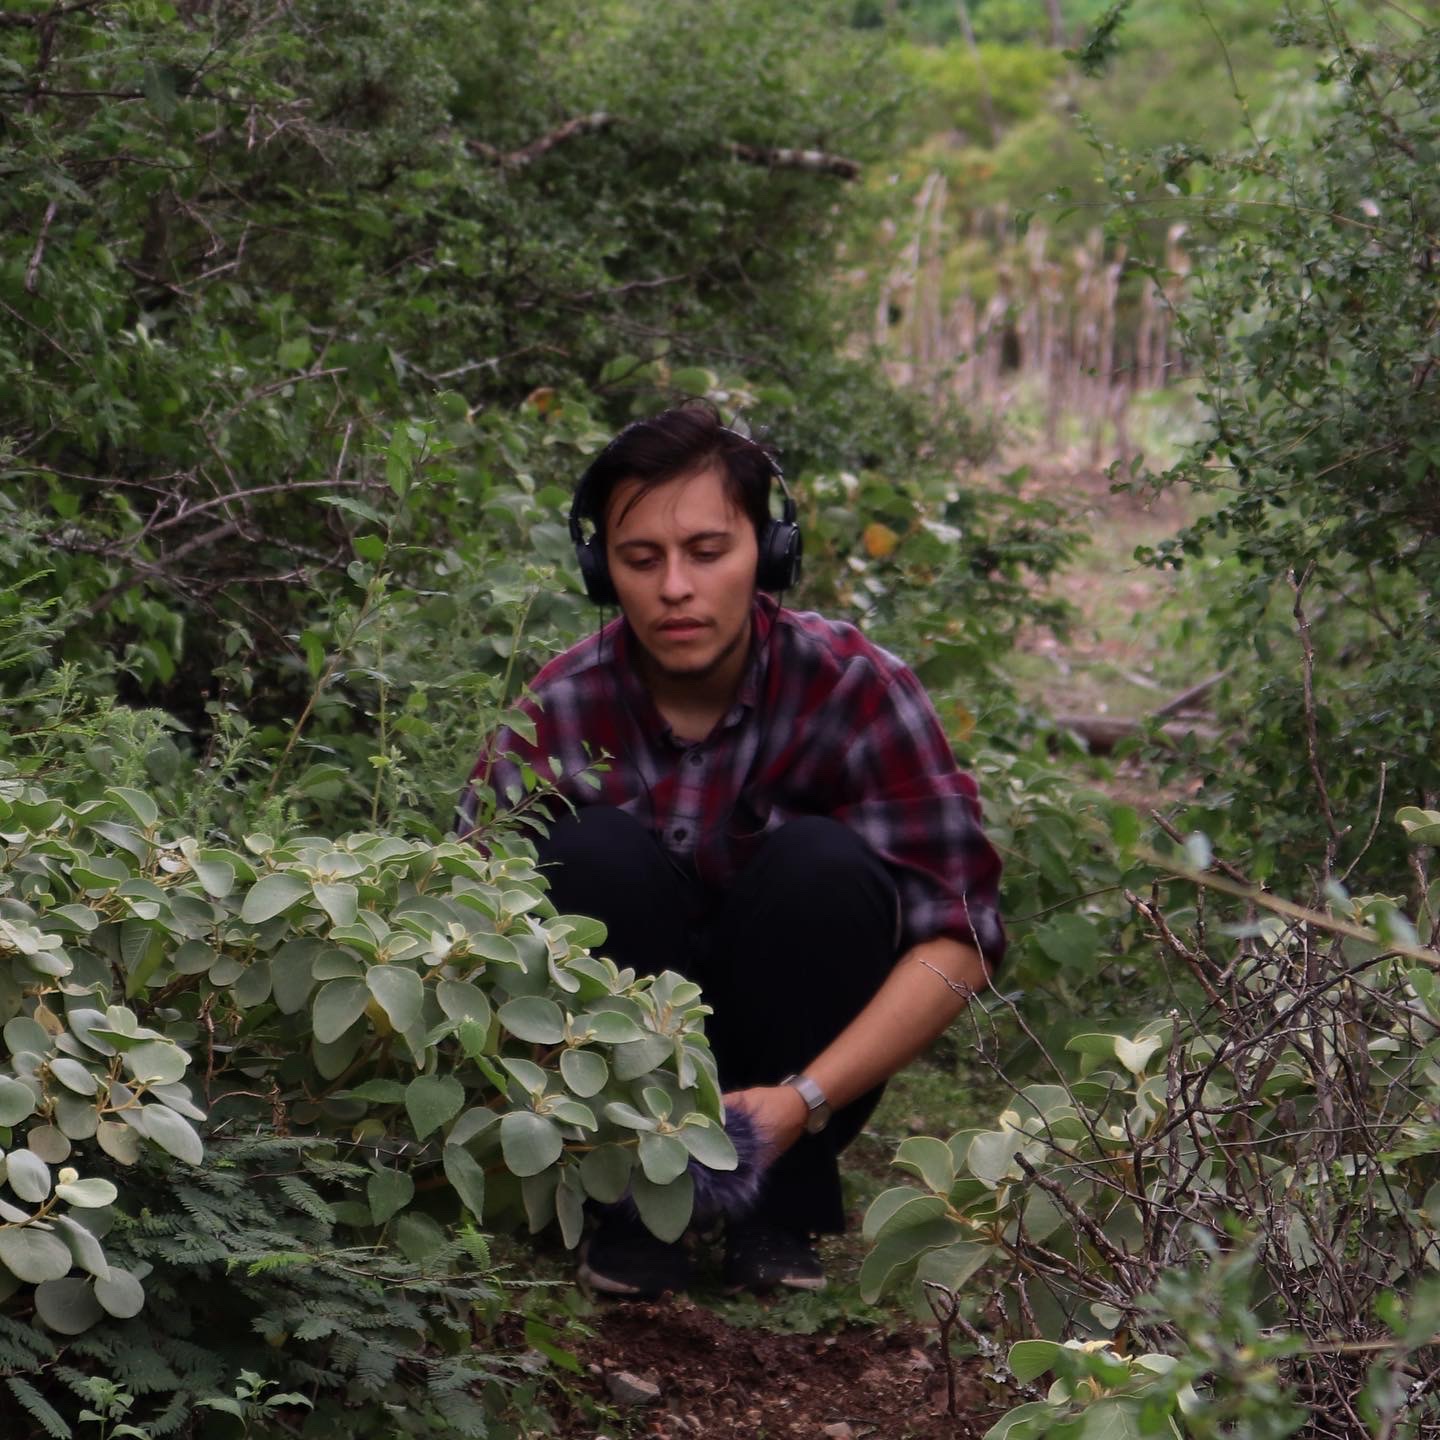 A light skin mestizo man squats down surrounded by thick green bushes. He uses black over-the-ear headphones to listen intently to sounds picked up through an audio recorder in his hand but obscured by the foliage. He is wearing a burgundy and grey plaid flannel and black pants. 